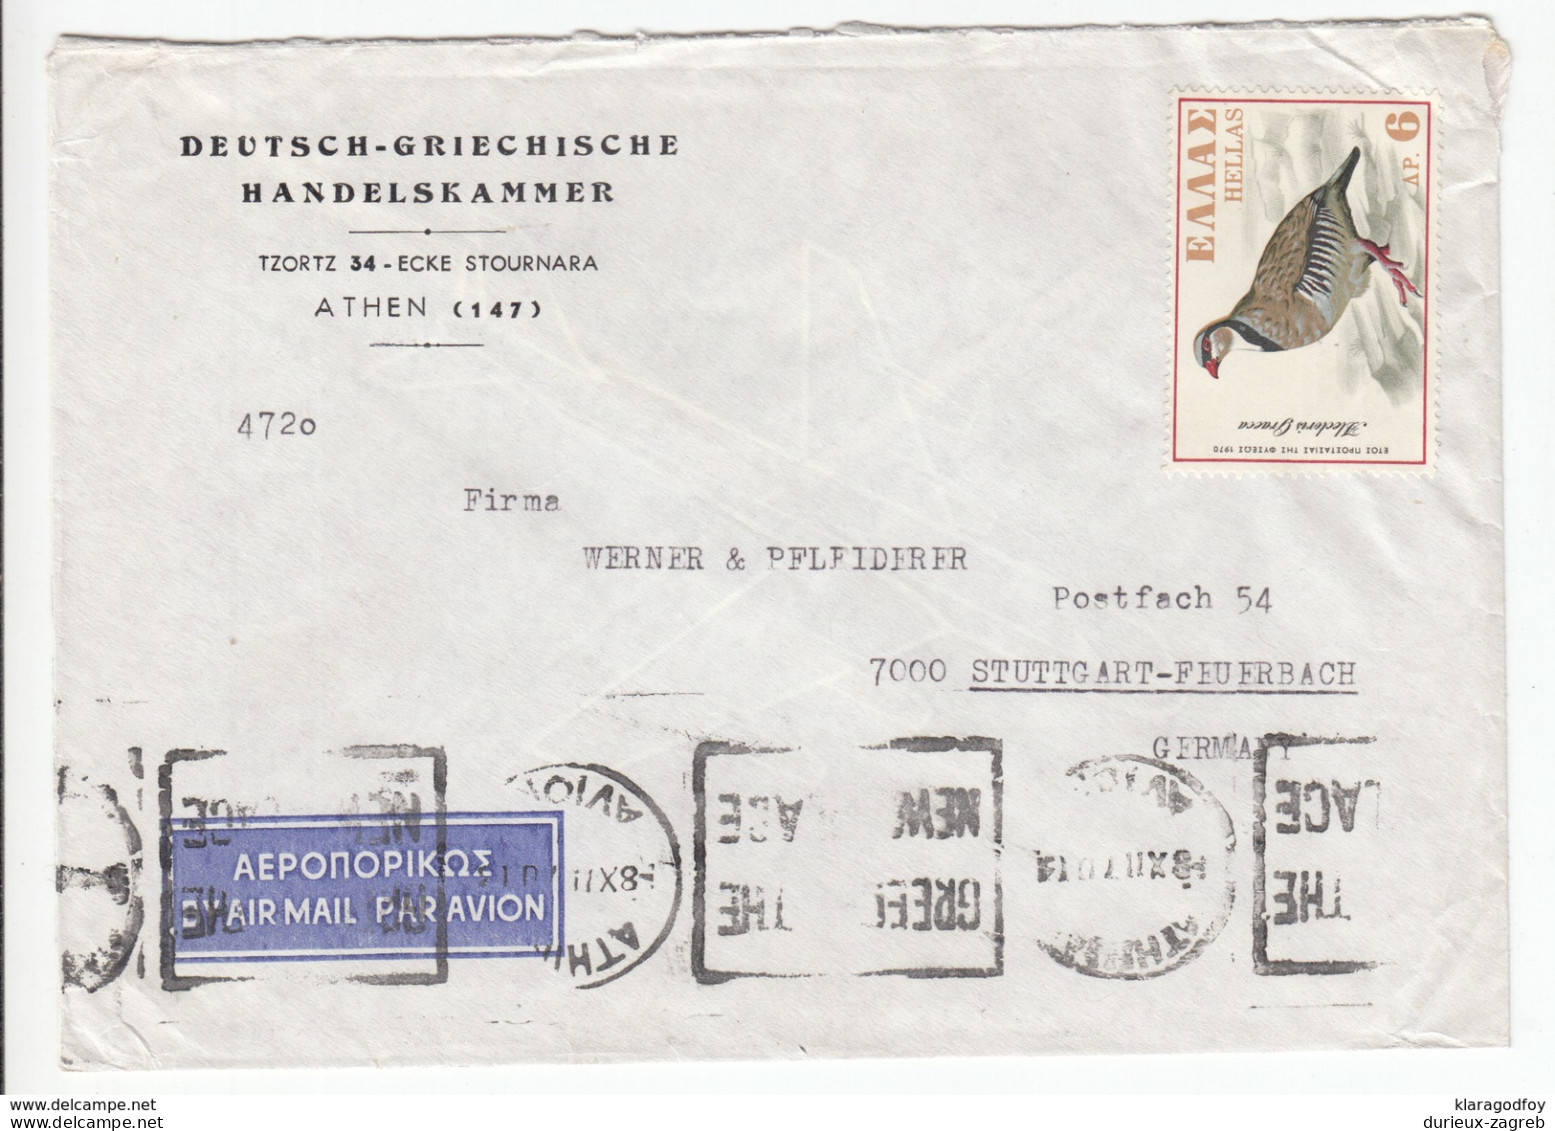 Greece, Deutsch-Griechische Handelskammer Company Airmail Letter Cover Travelled 1970 B171025 - Covers & Documents